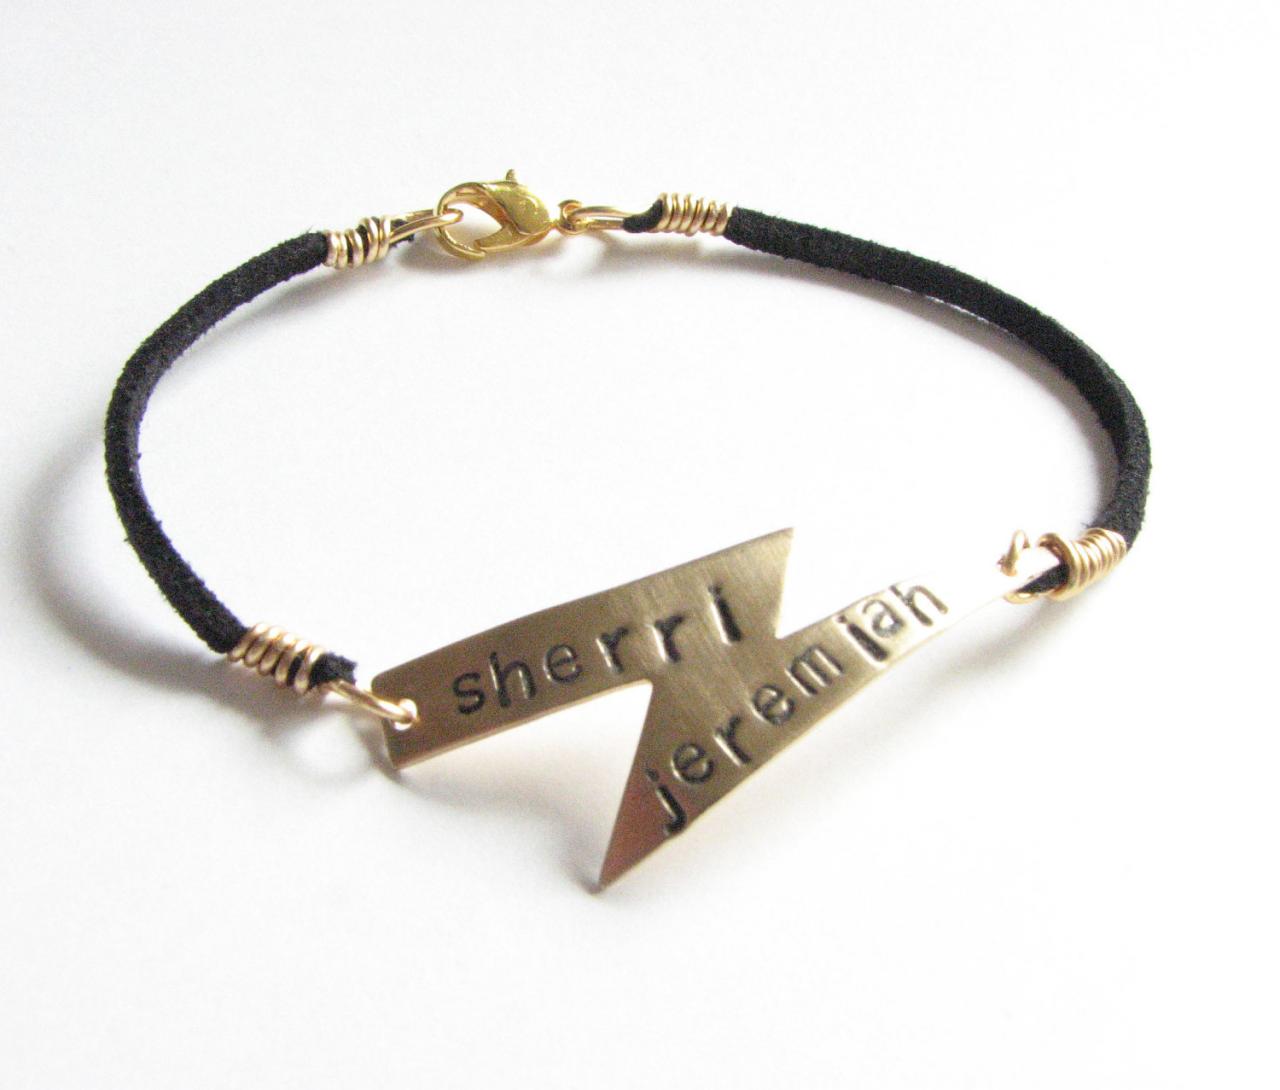 Lightning Bolt Bracelet Hand Stamped Black Suede Leather Engraved Personalized Jewelry